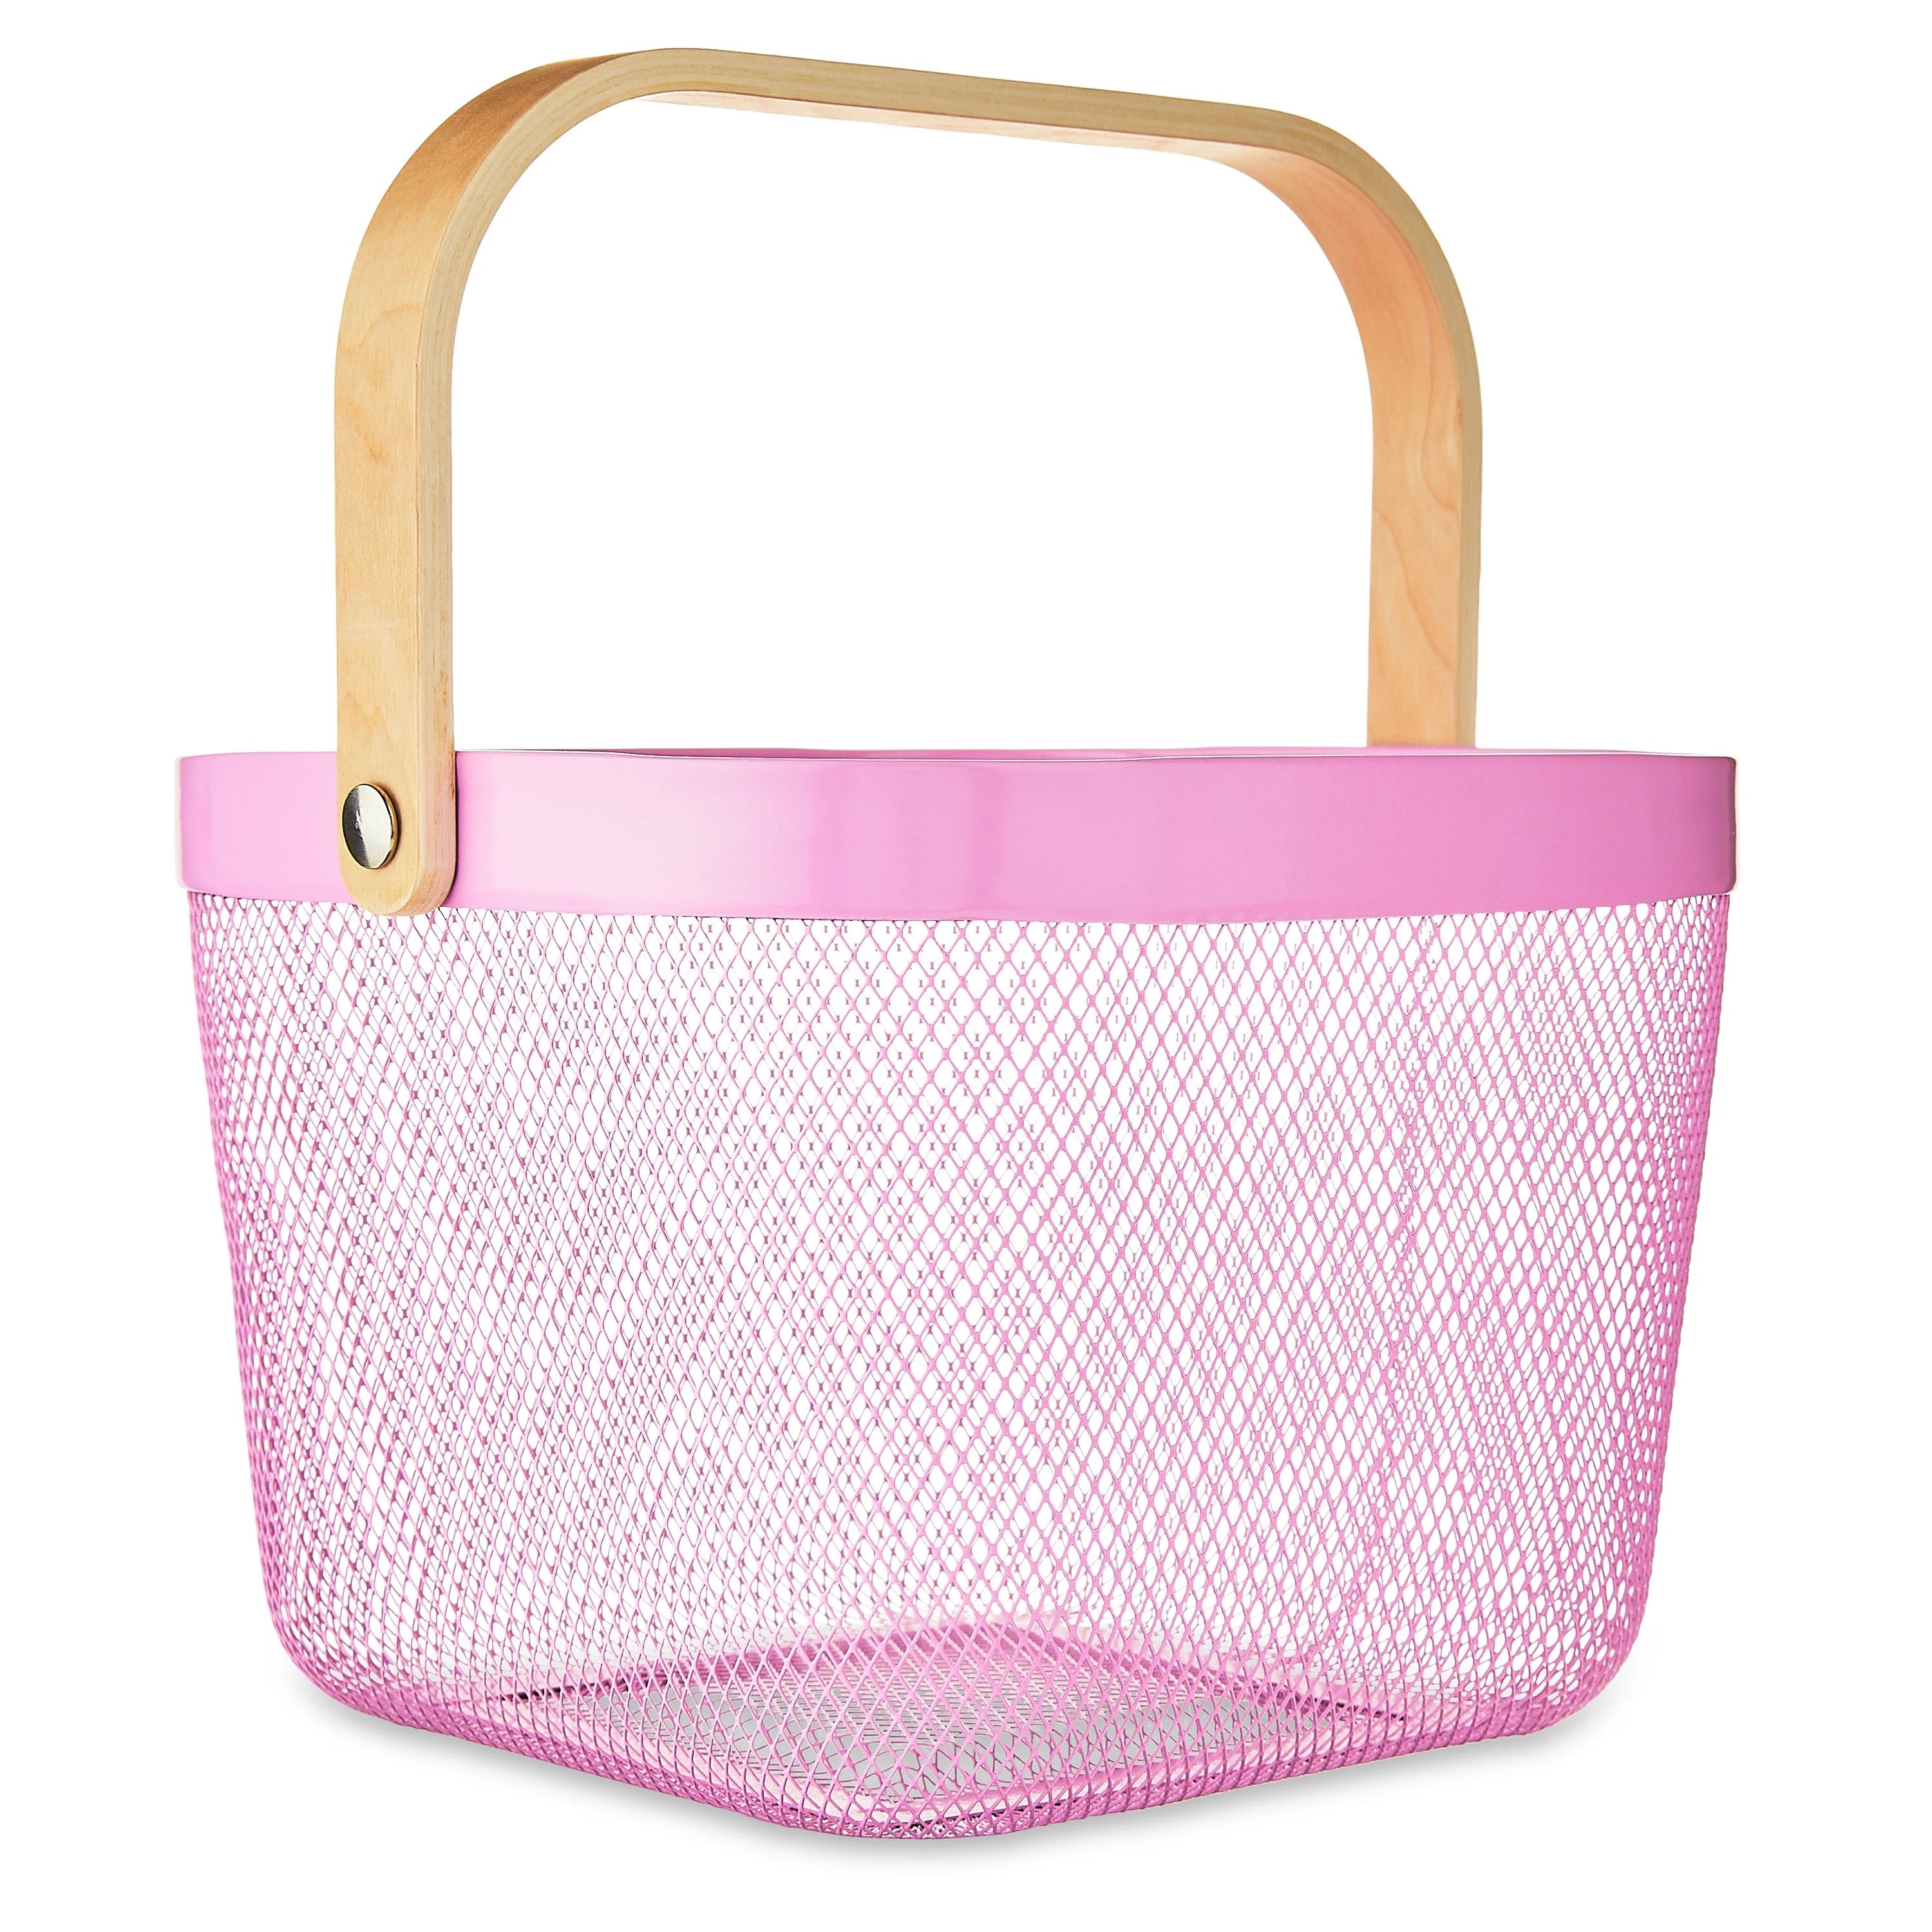 Easter Mesh Basket with Folding Wooden Handle, Pink, 9.4" x 9.8" x 7", by Way To Celebrate | Walmart (US)